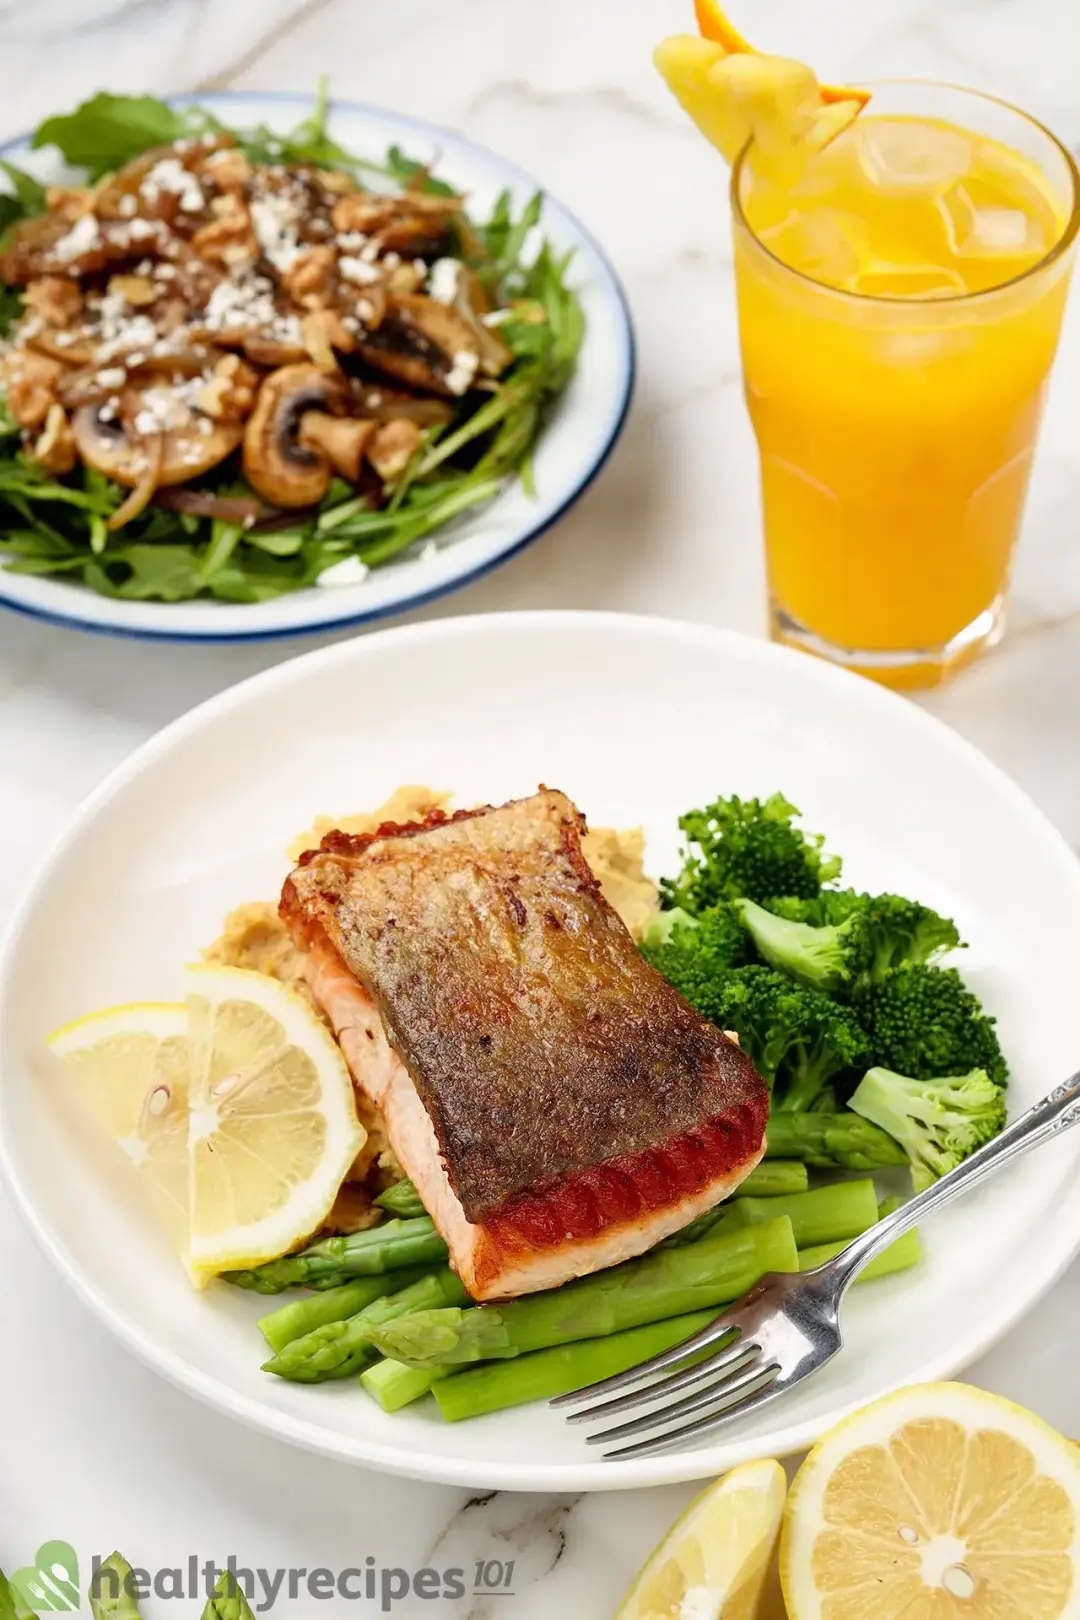 A plate of crispy-skin salmon served with a plate of mushroom salad and a glass of orange pineapple juice